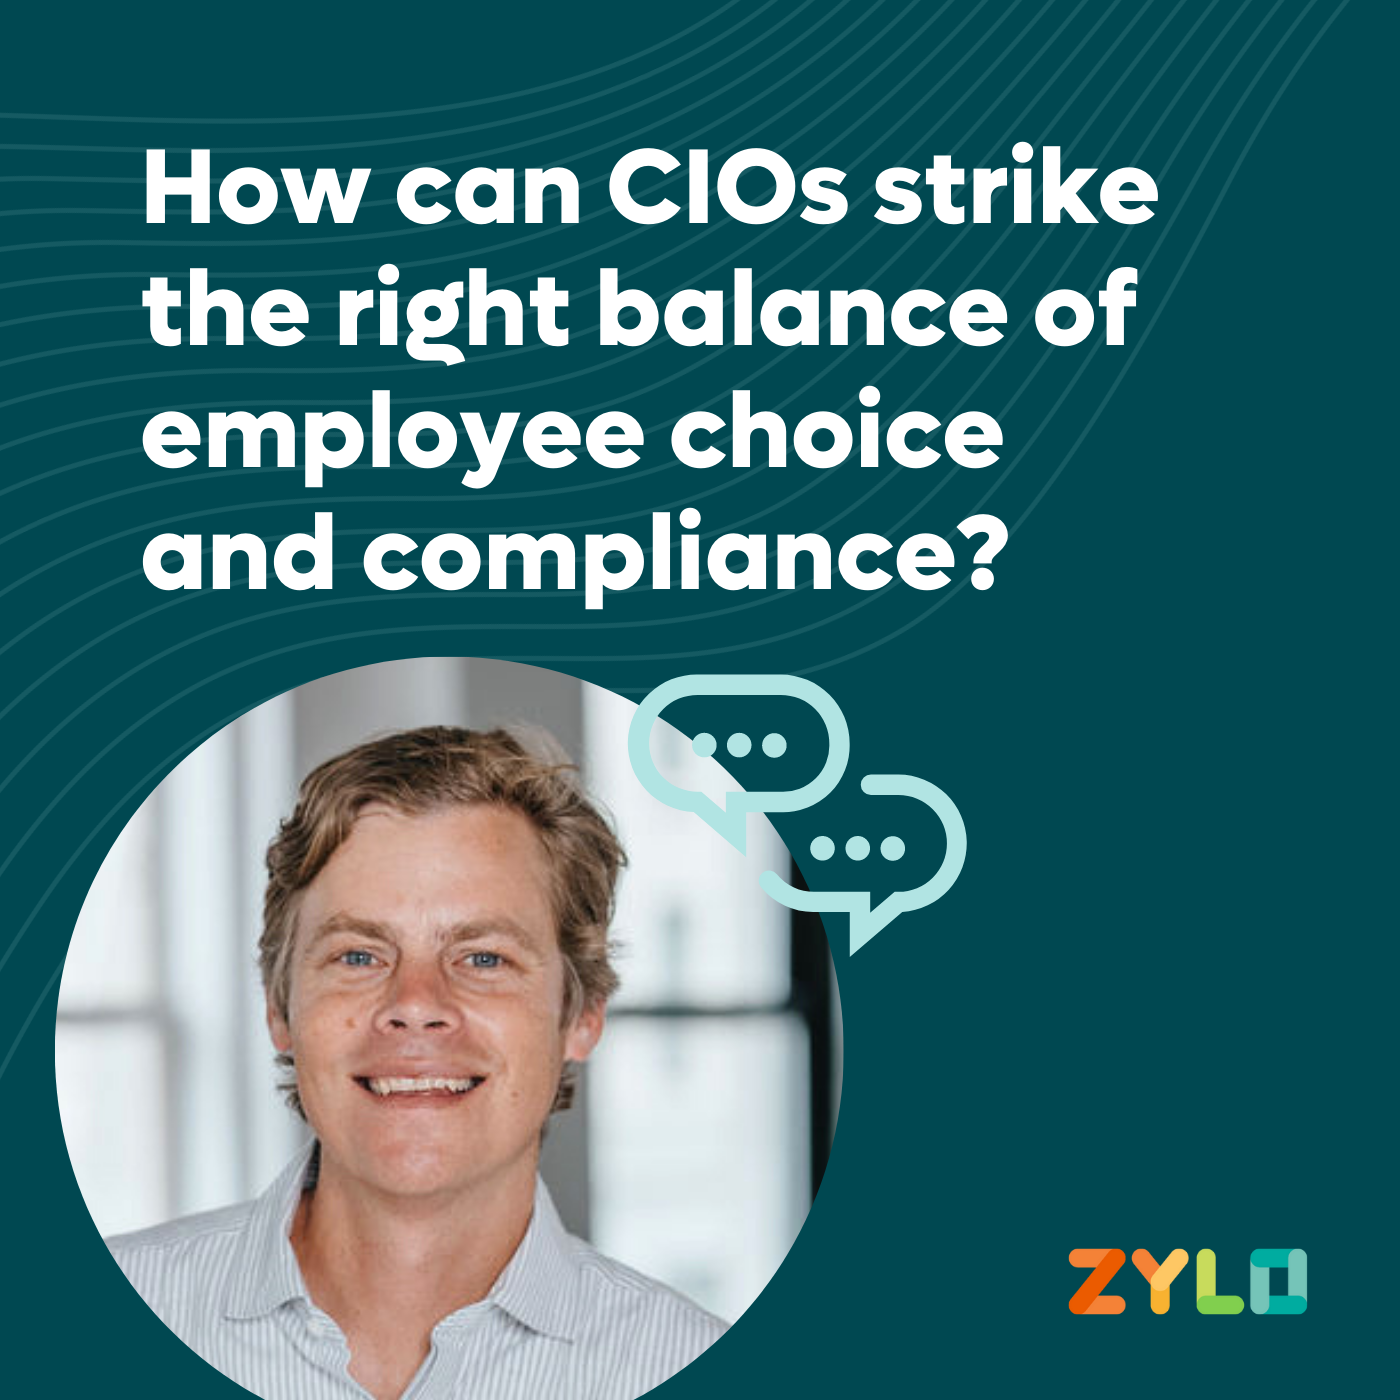 How can CIOs strike the right balance of employee choice and compliance?